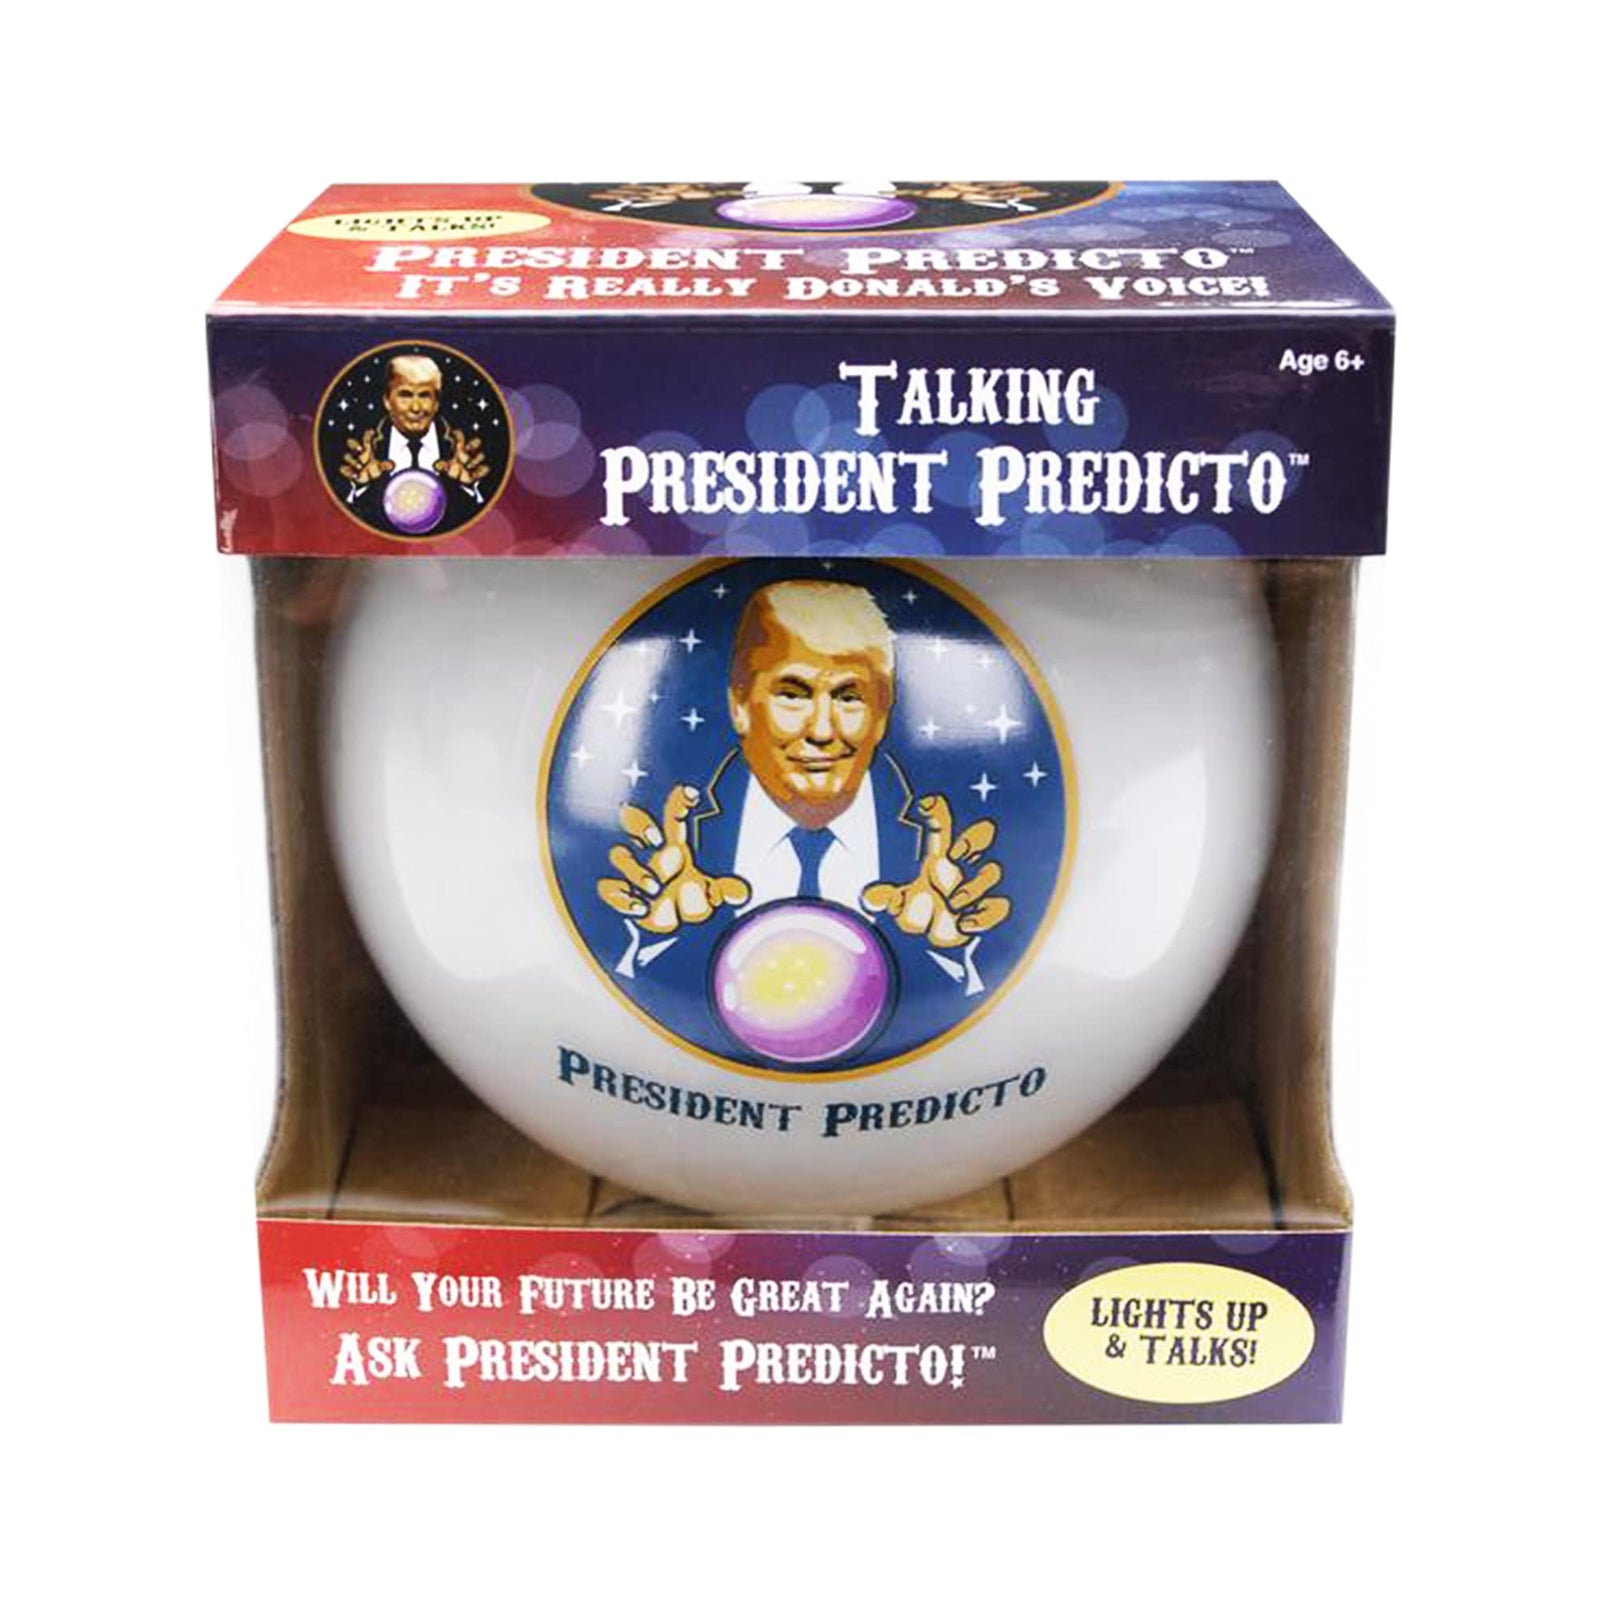 Talking President Predicto - Donald Trump Fortune Teller Ball - Lights Up & Talks - Ask YES or NO Question & Trump Speaks The Answer - Like a Next Generation Magic 8 Ball – Christmas Stocking Stuffer